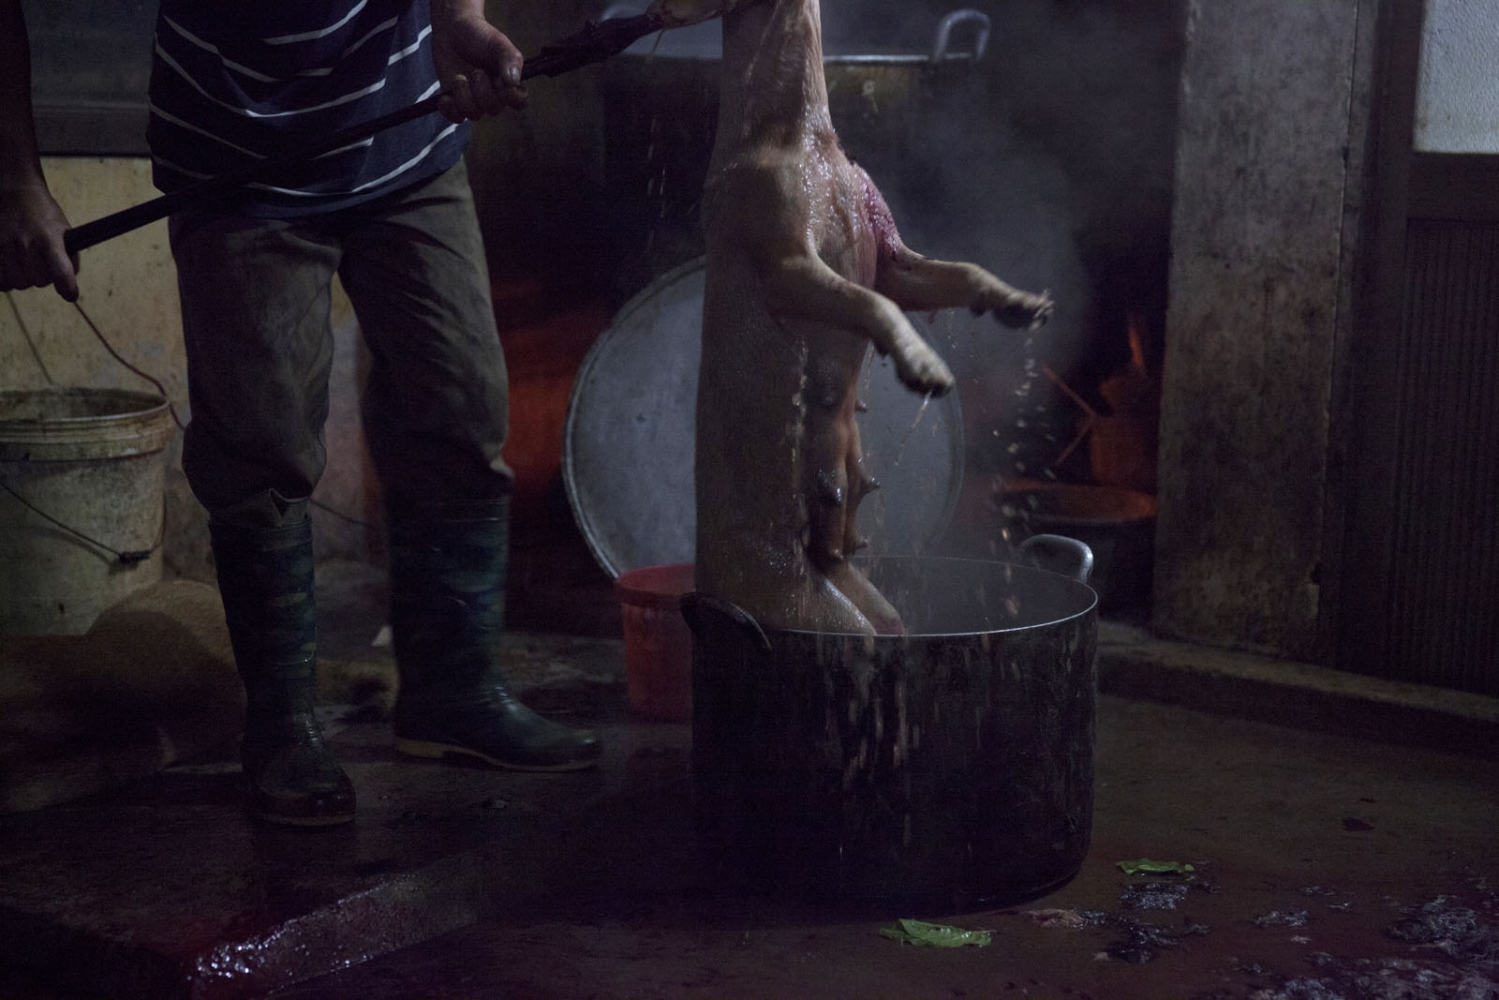 THAILAND'S ILLEGAL DOG MEAT TRADE - At a slaughter house in the middle of the night, the dogs...